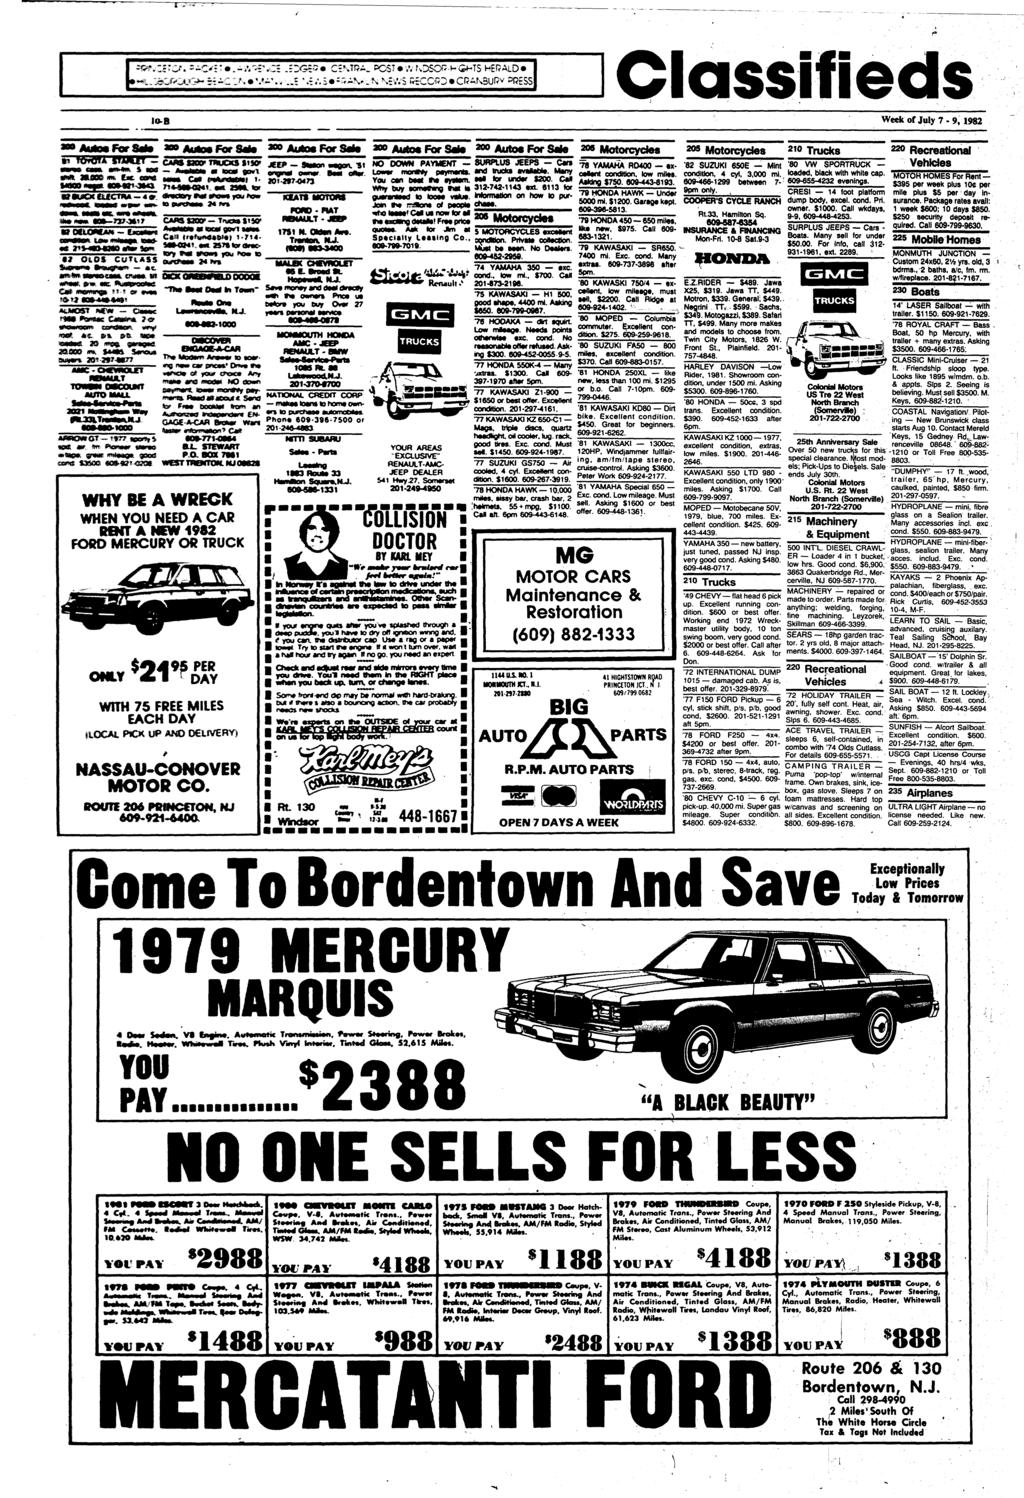 Classifieds 1O-B Week of July 7-9, 1982 For S*»»> Auto* For Sato»> Autos For Sato»» Autos For Sato ** Motorcydes m IOWJ* w*«jrr CM* now meal MO DOWN PAYMENT m, MM. mm, mm.